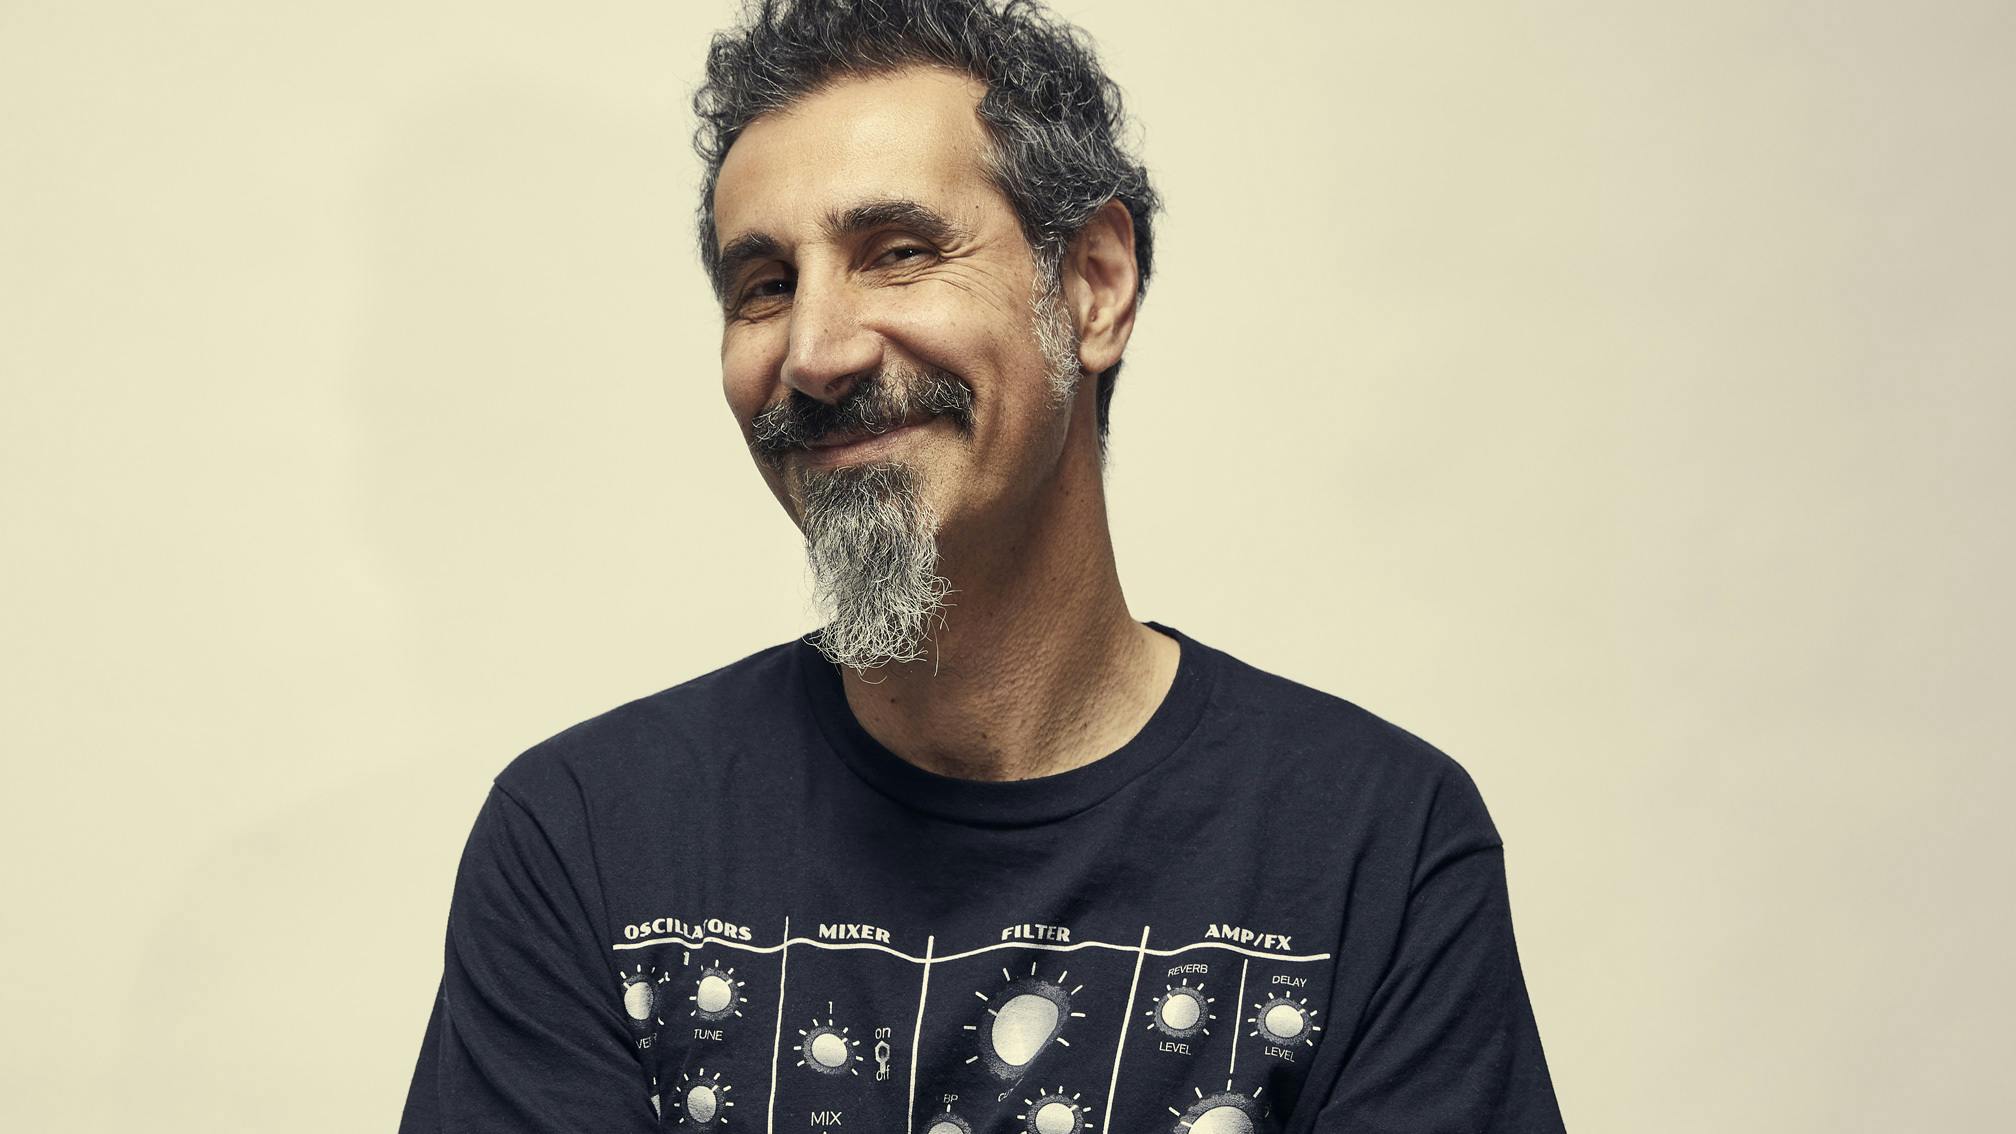 Serj Tankian gives COVID update: "I am doing well and hoping to be clear of all symptoms soon"